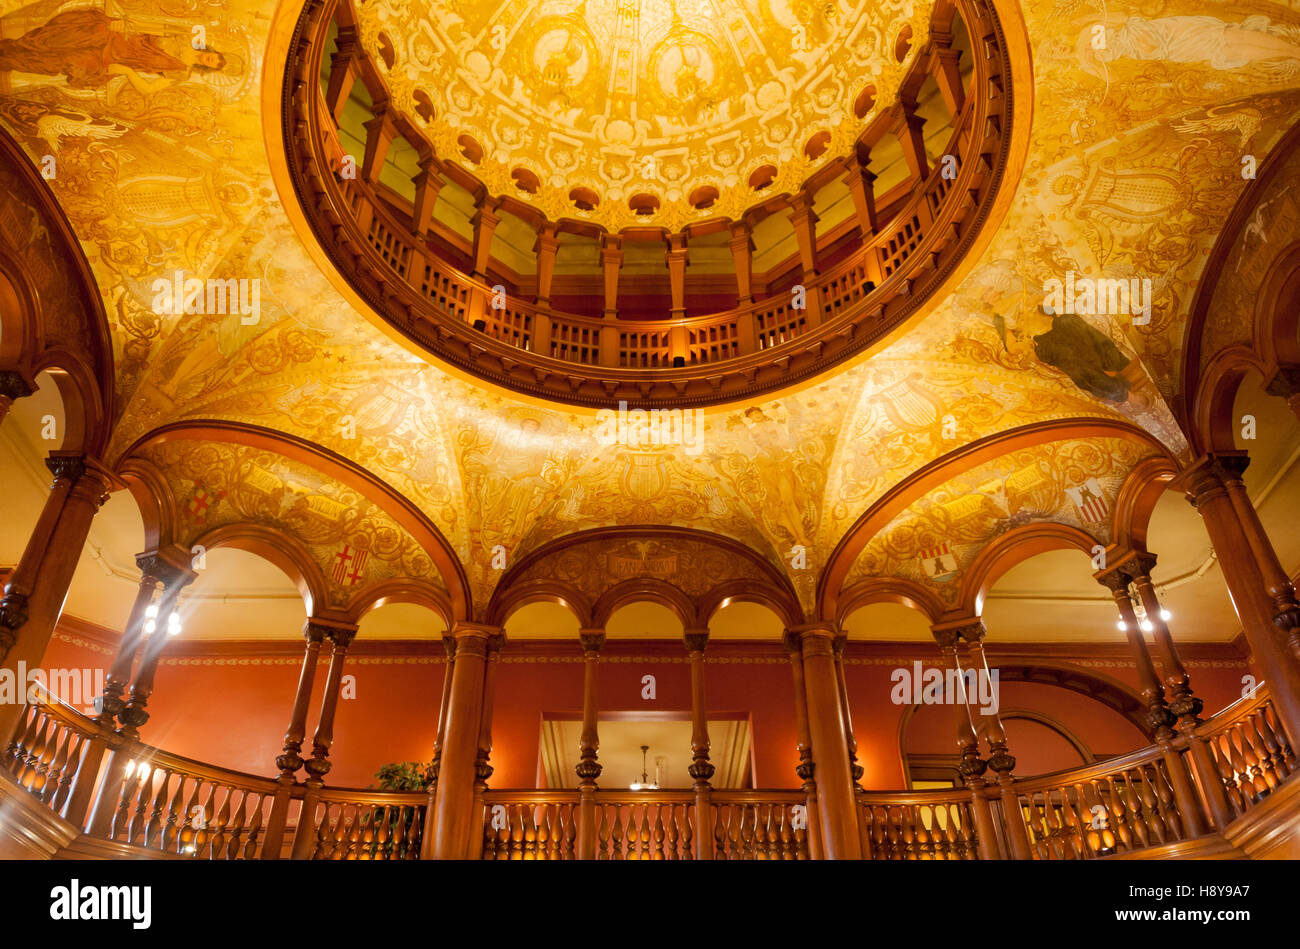 Spanish Renaissance style atrium with dome ceiling at Flagler College (formerly the Ponce de Leon Hotel) in St. Augustine, FL. Stock Photo